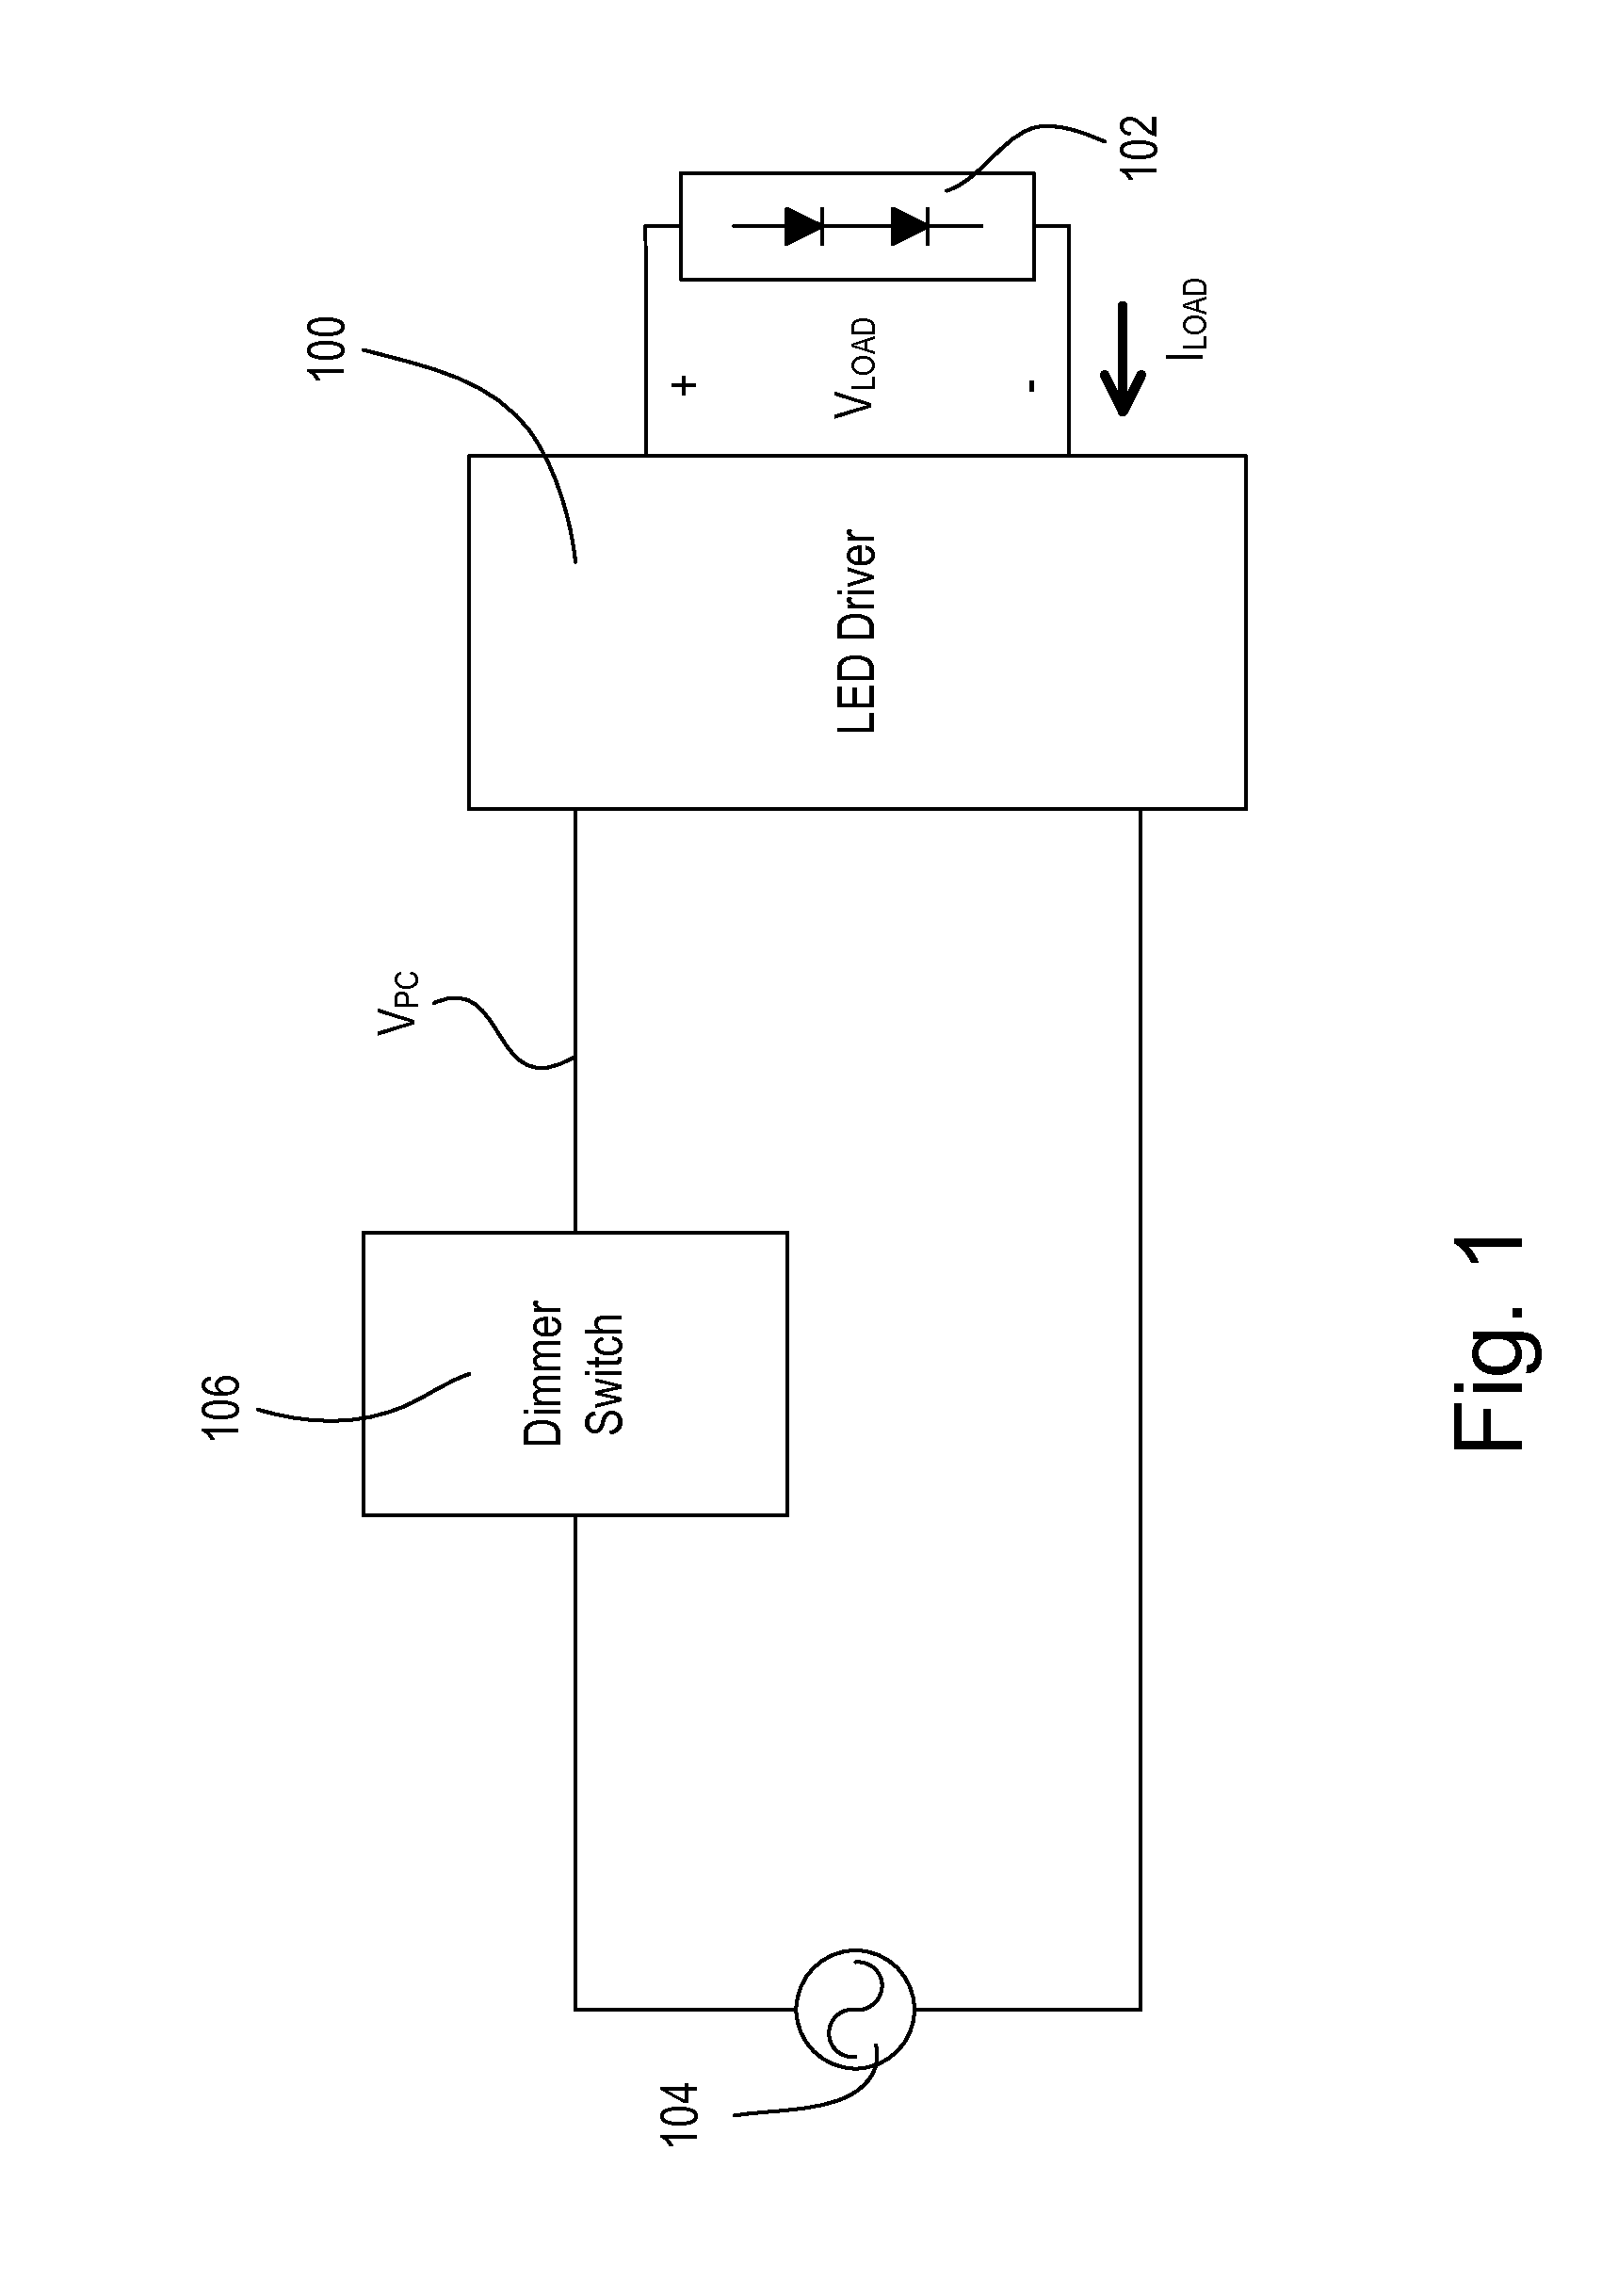 Load Control Device for a Light-Emitting Diode Light Source